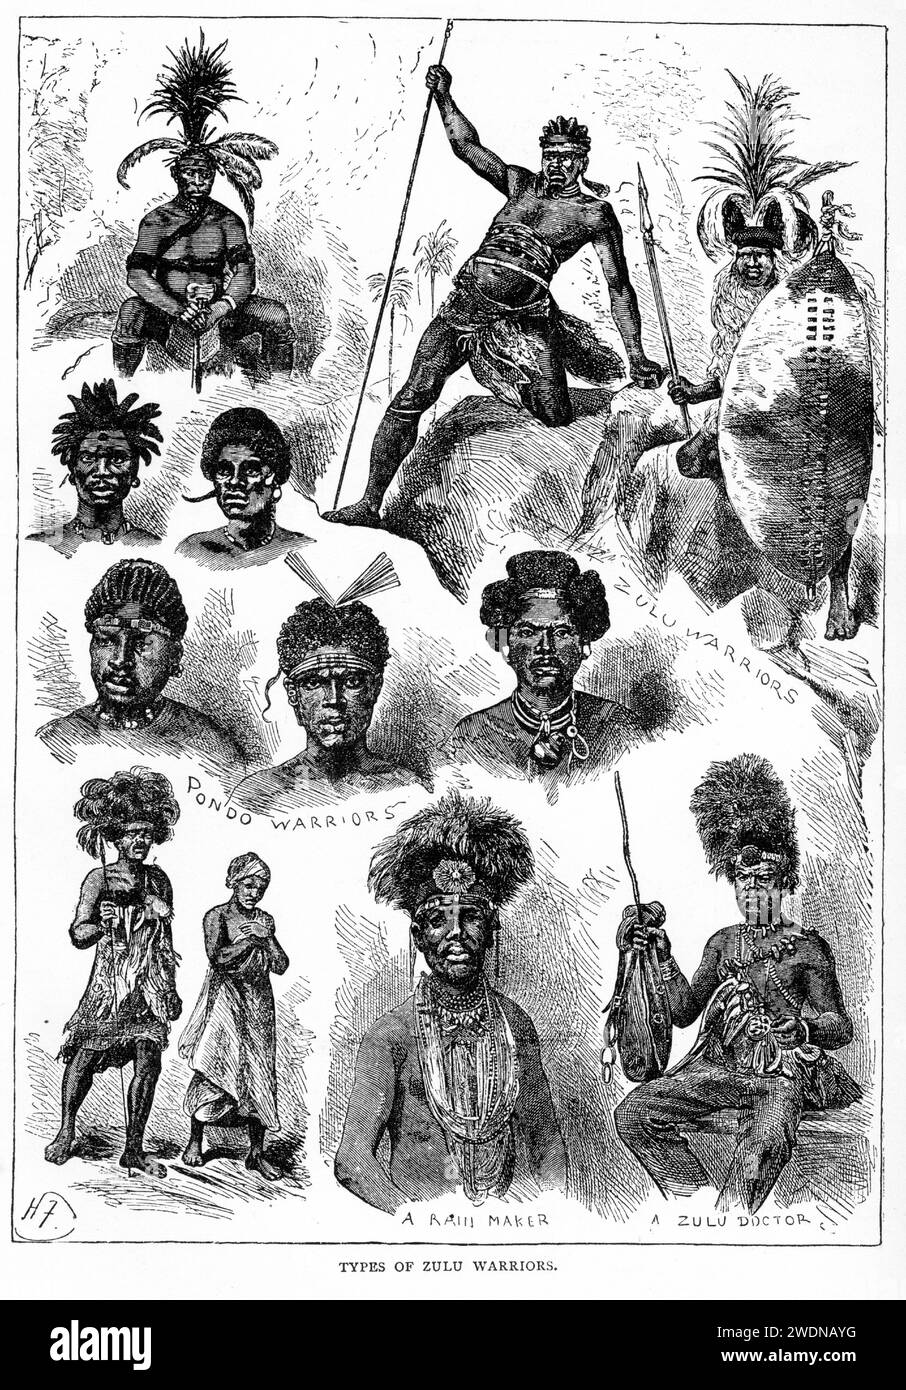 portraits of Zulu warriors, including fighting men, witch doctor, rainmaker and pondo warriors Stock Photo